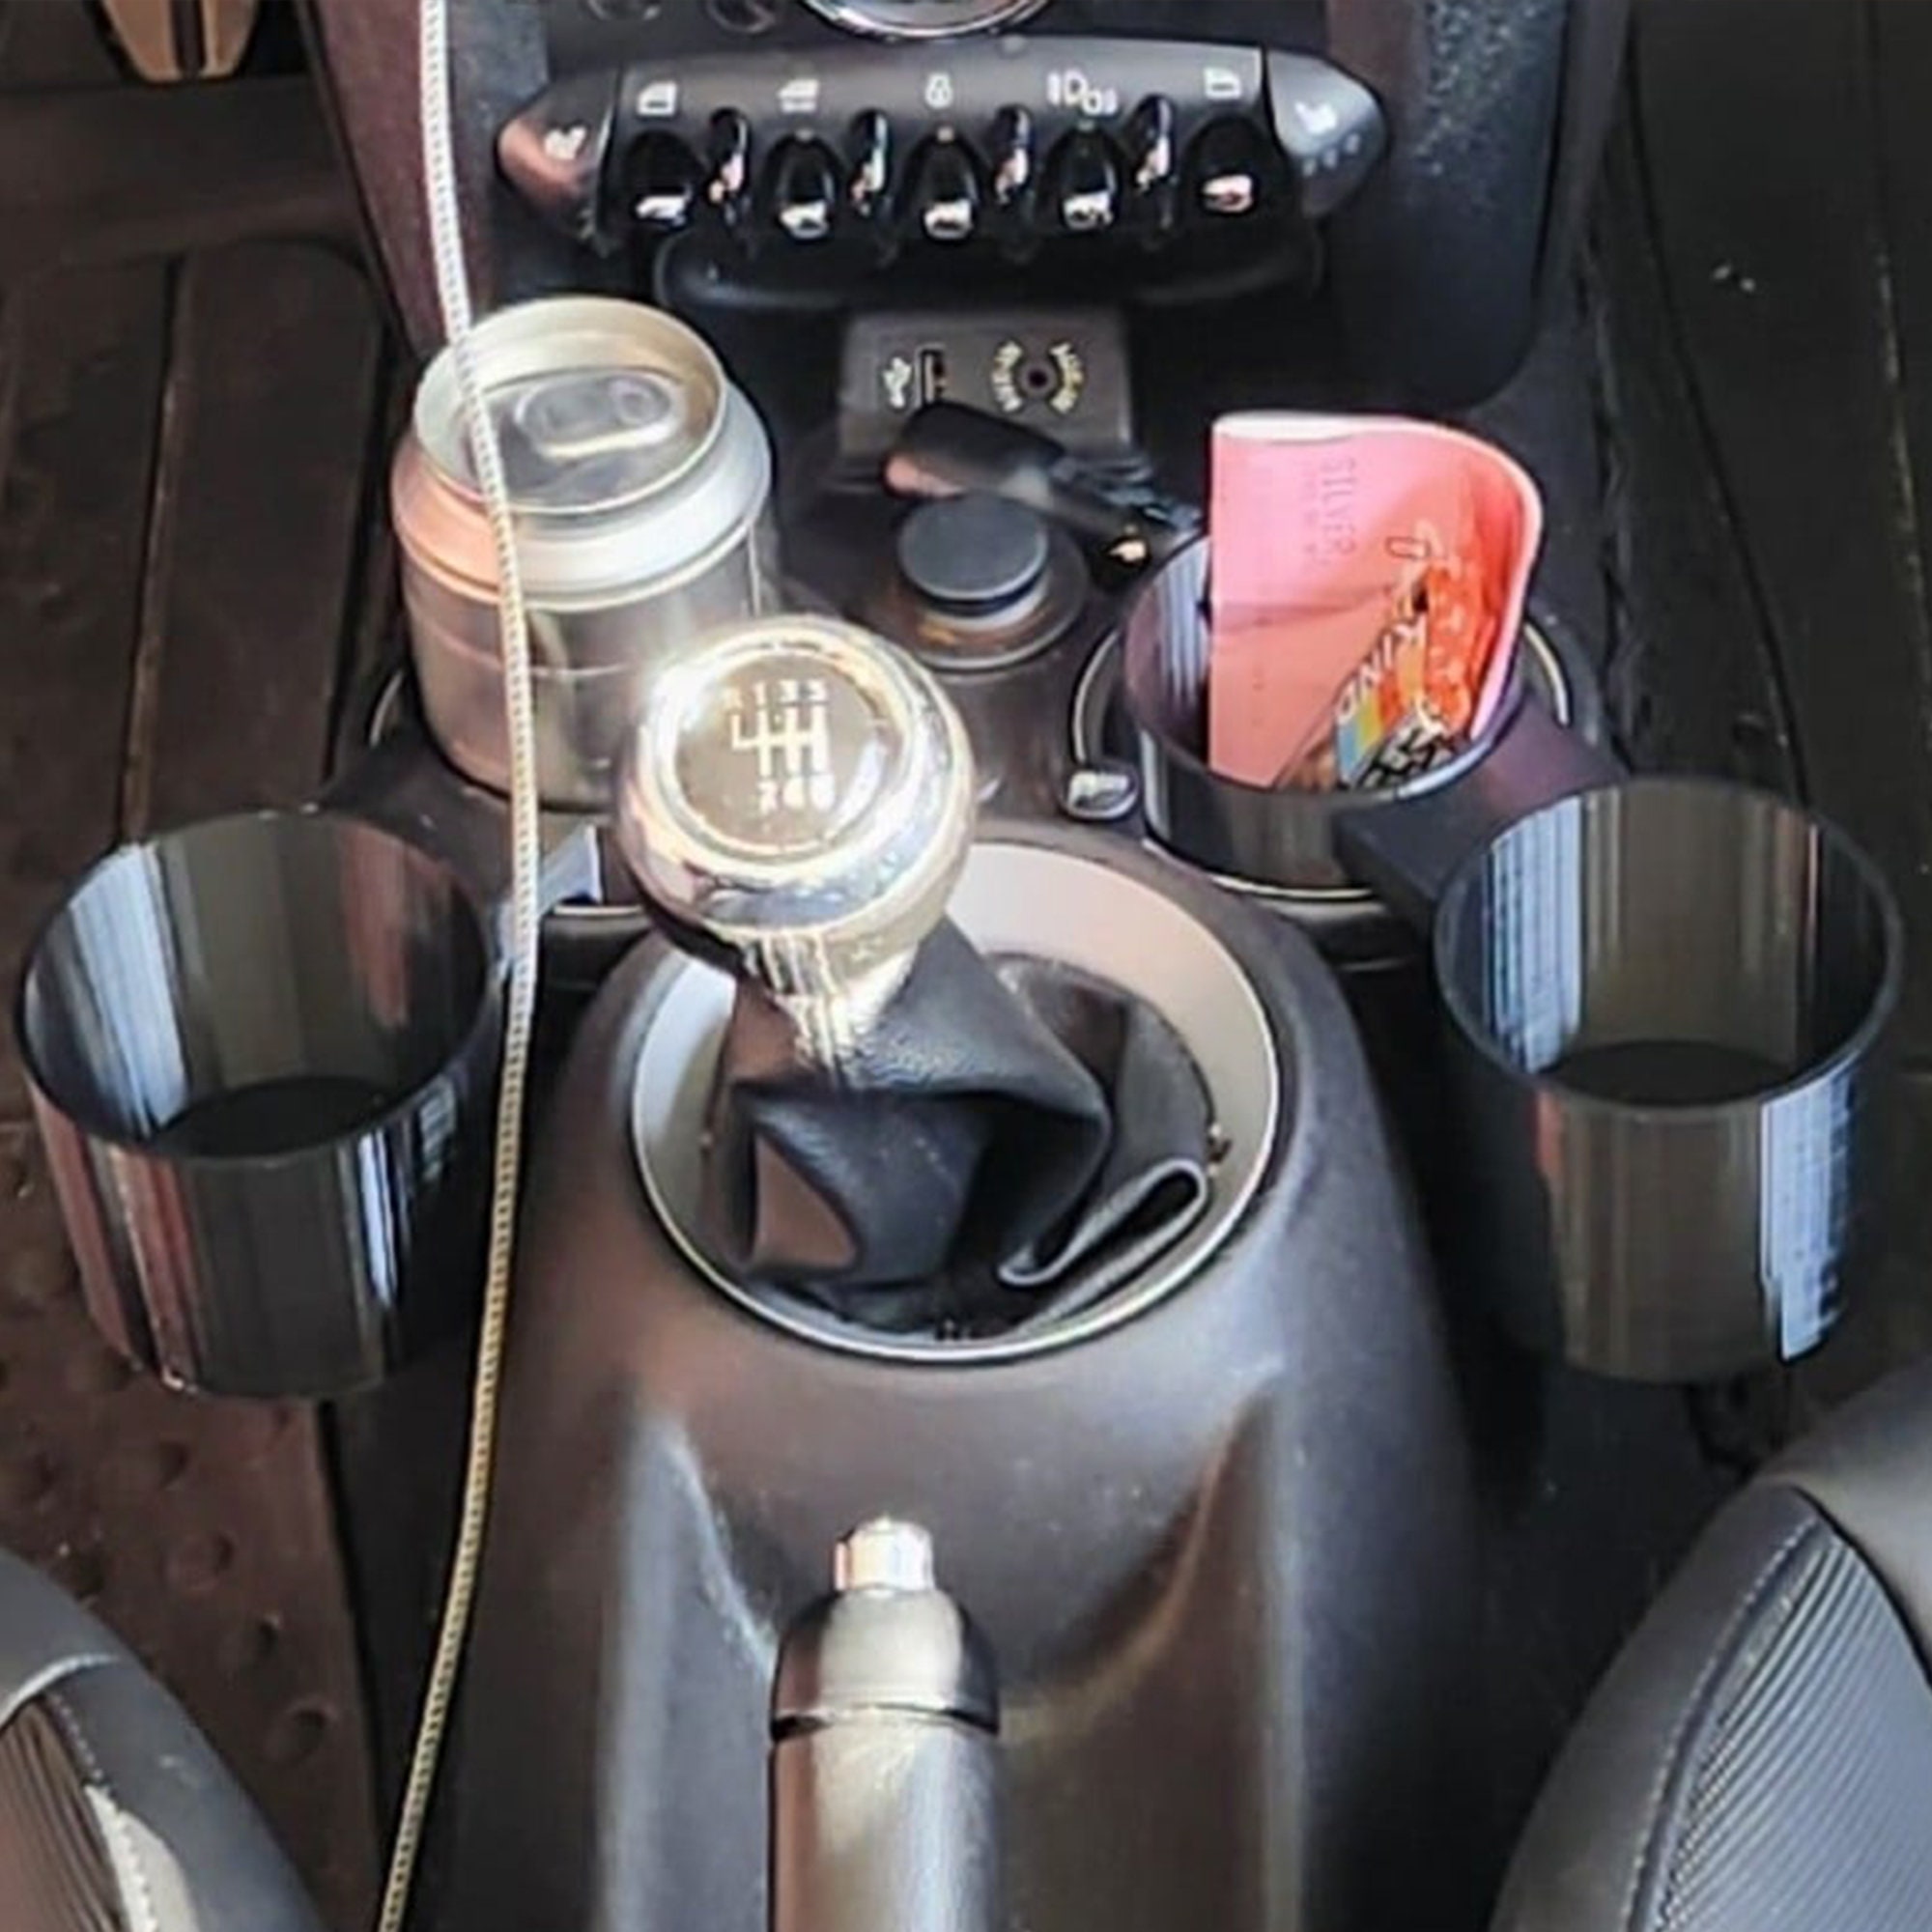 THIS HILL Car Cup Holder Expander Adapter (Adjustable) with Removable Phone  Holder,Cup Holder Expander for Car with Rubber Fits Less Than 4.4 Bottles